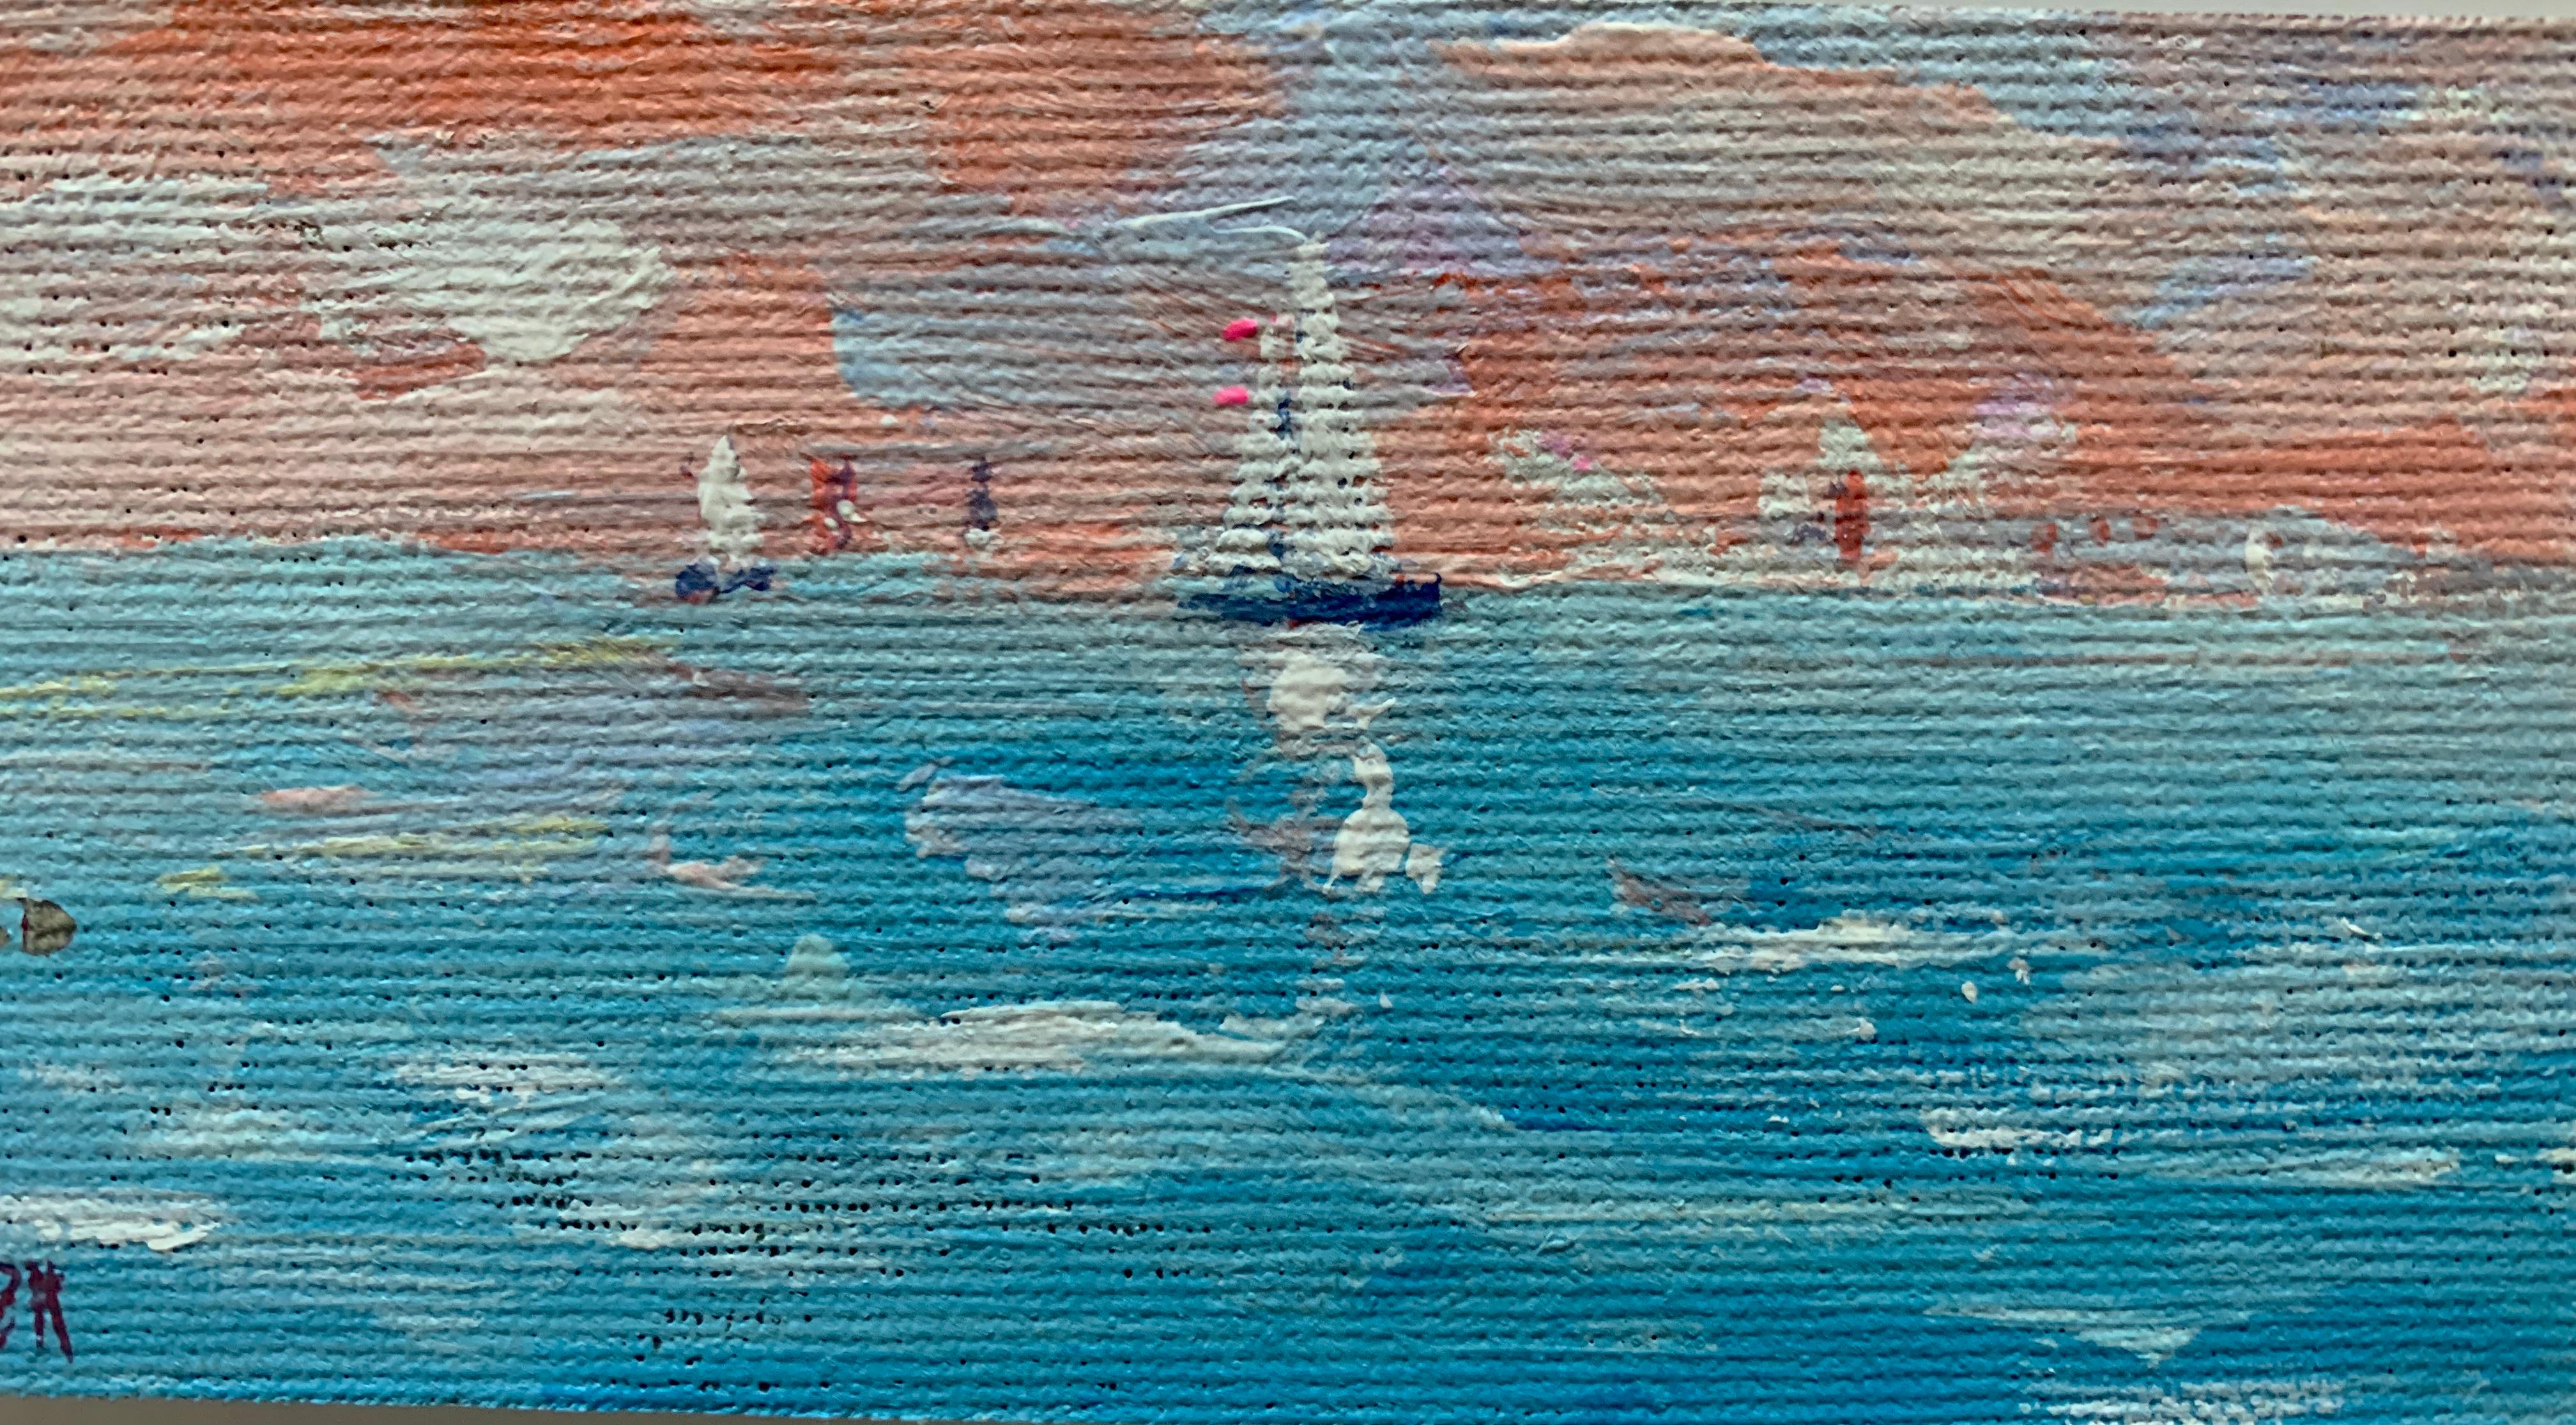 Impressionist oil sketch of yachts off the coast of Nantucket with a Setting Sun - American Impressionist Painting by Charles Bertie Hall